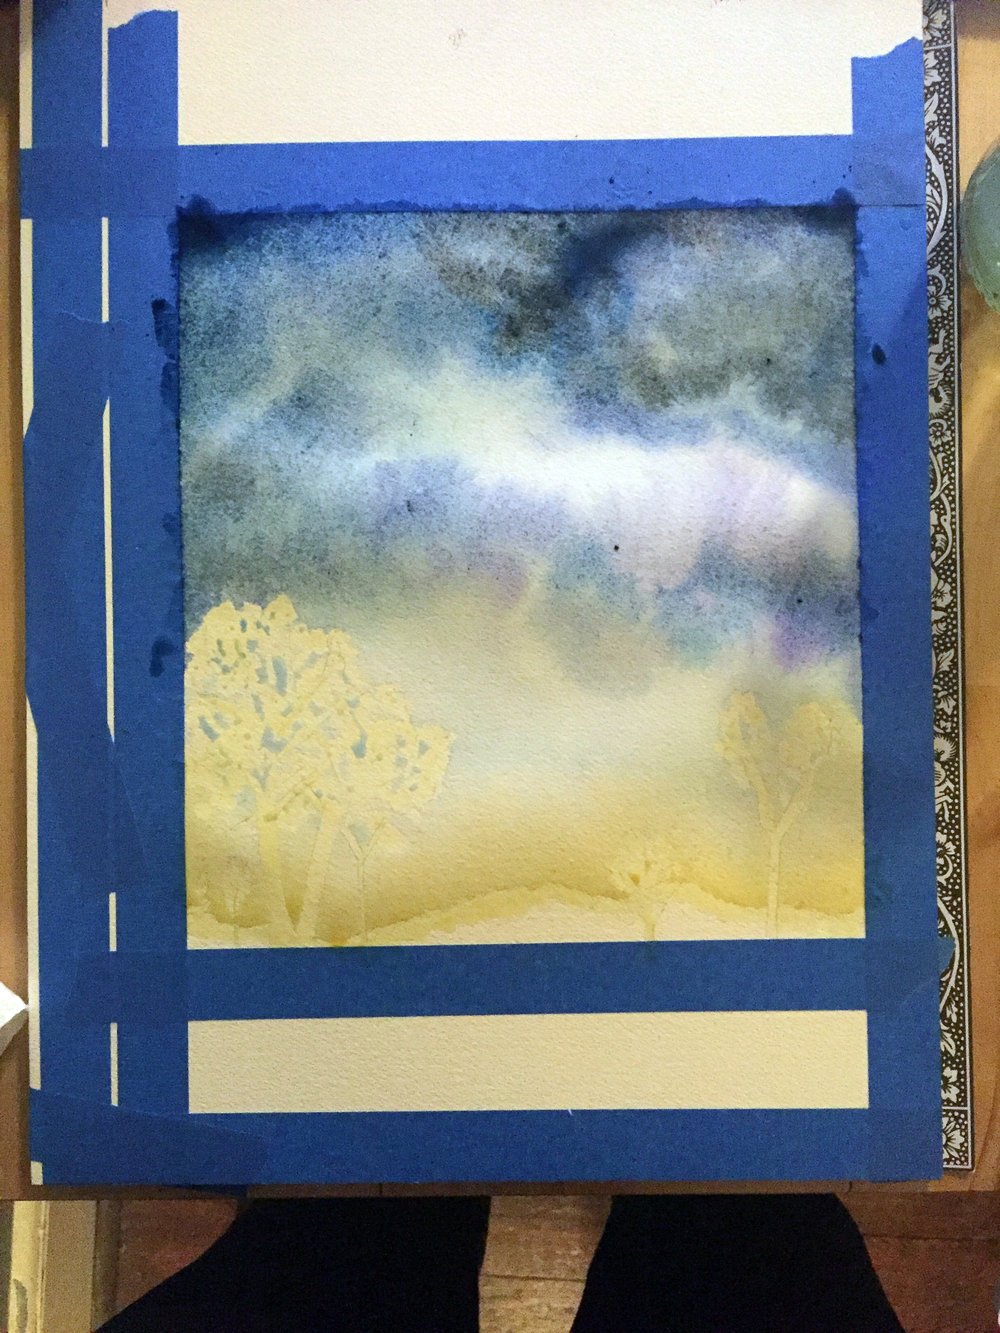  Step 1: Apply masking fluid &amp; begin painting the sky 